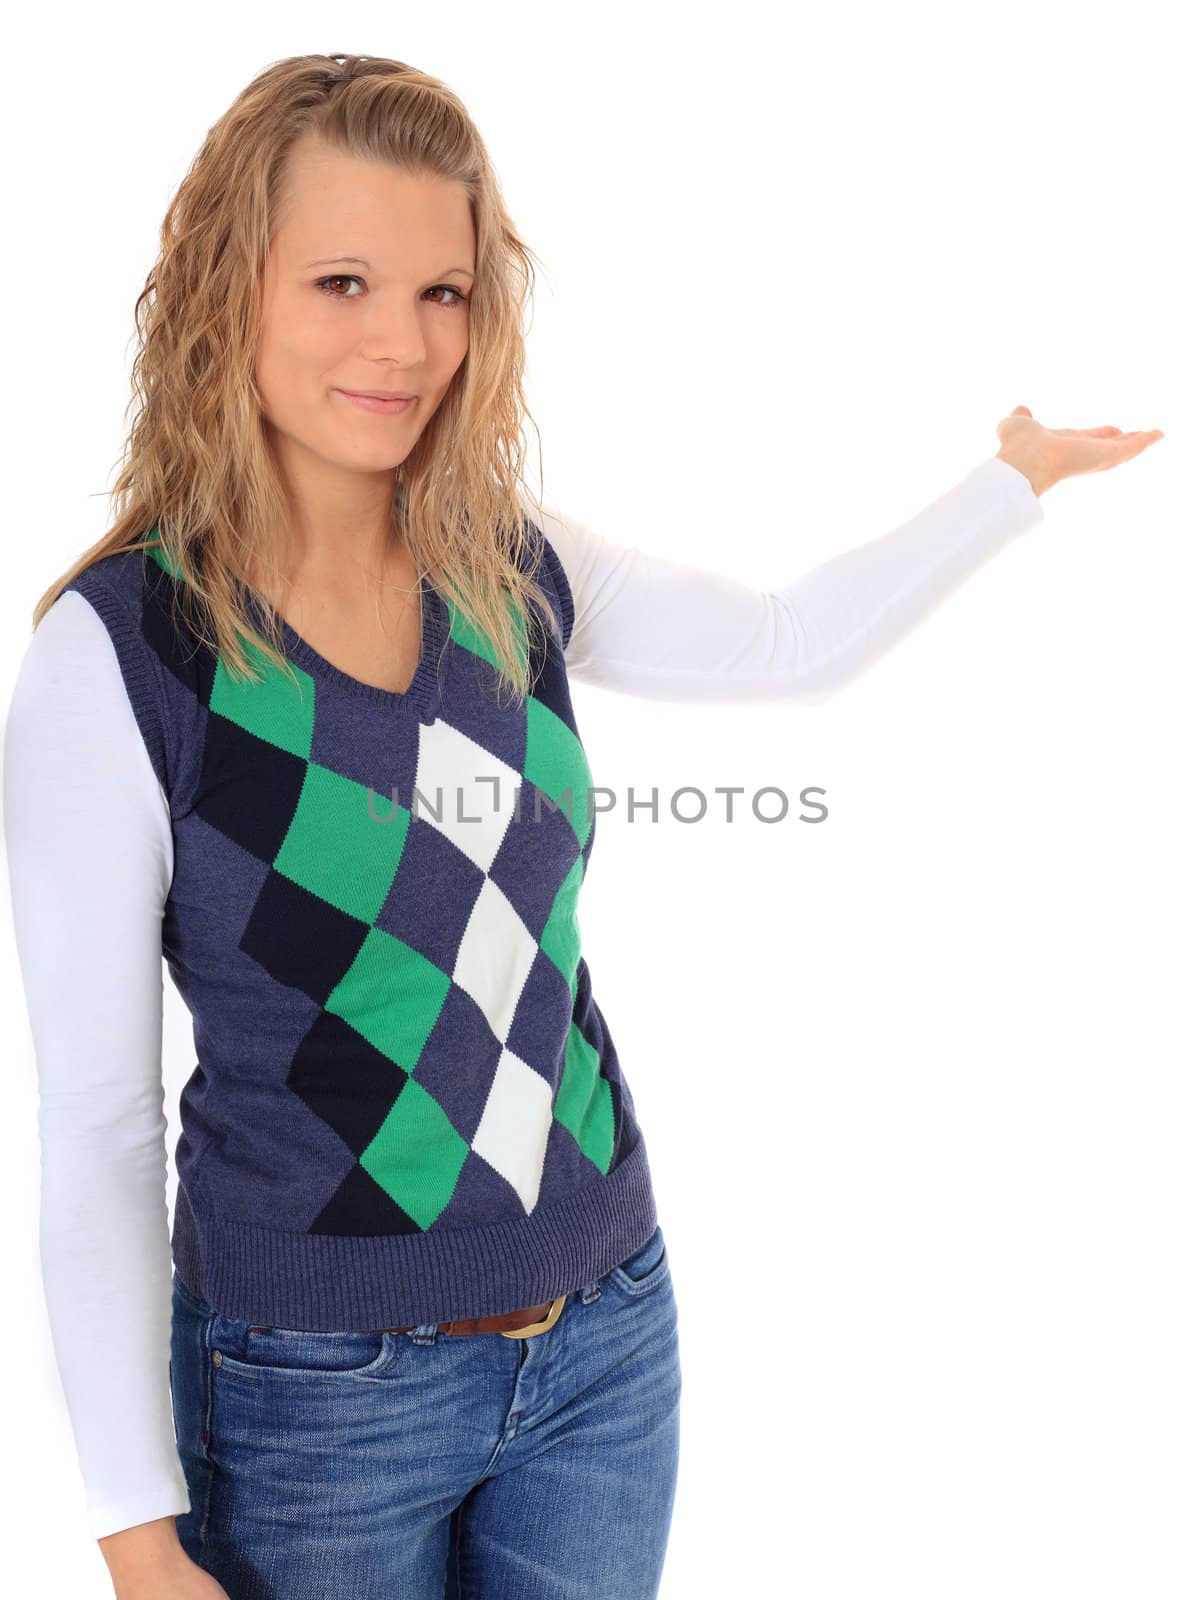 Attractive blonde woman showing to the side. All on white background.